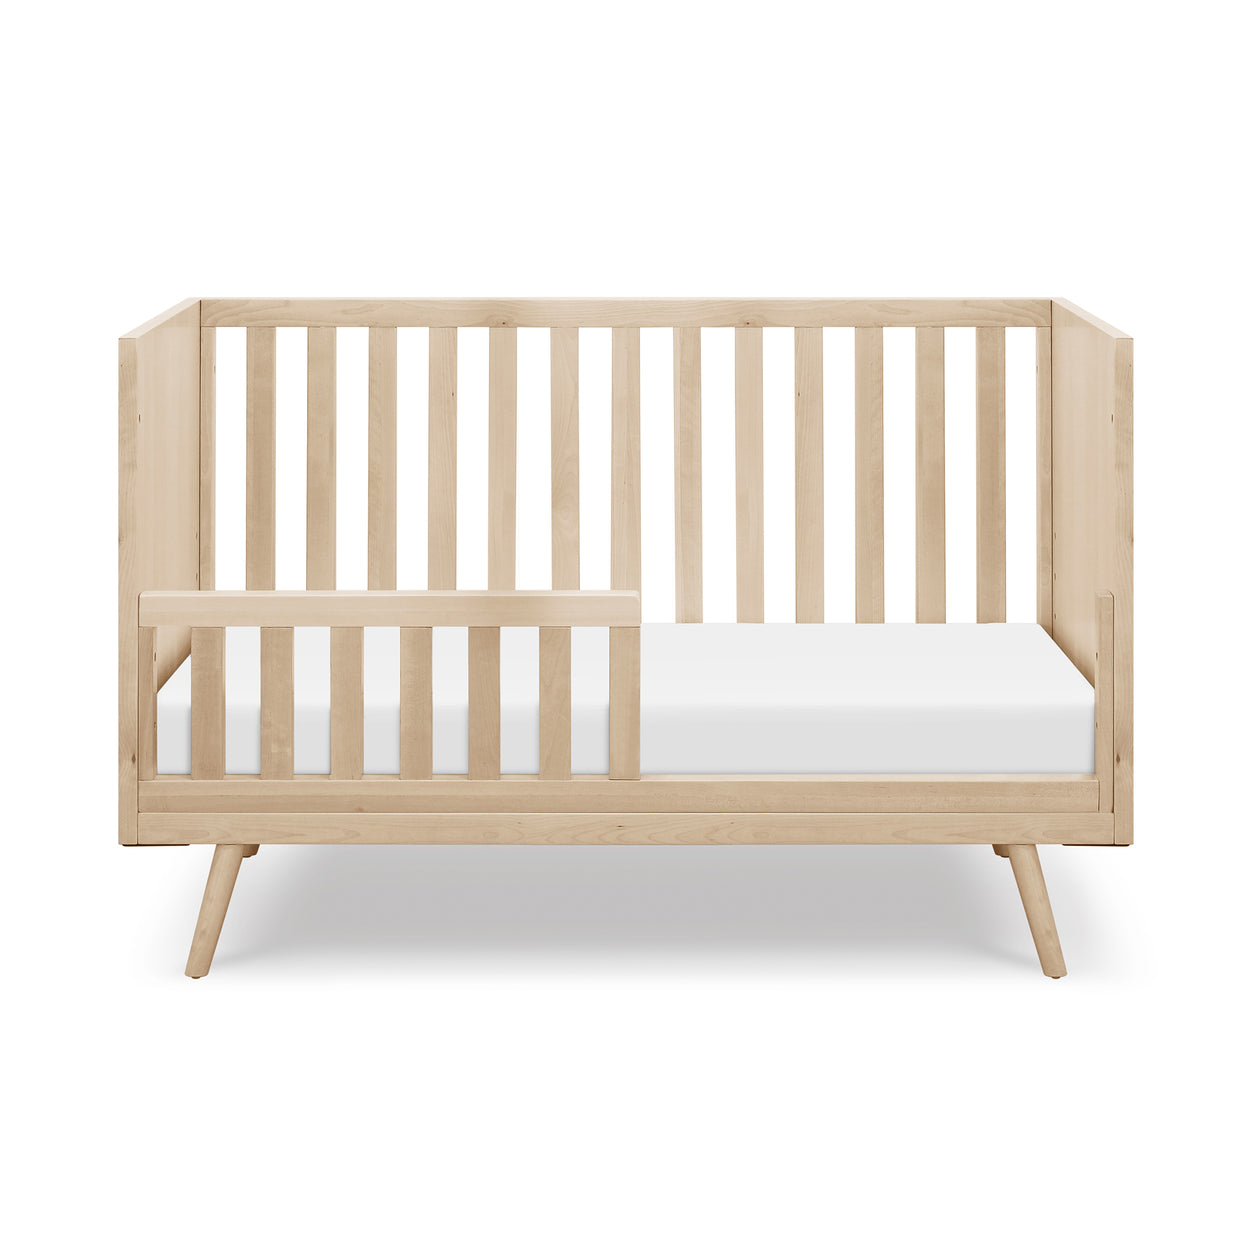 Nifty Toddler Rail Extension Kit in Birch